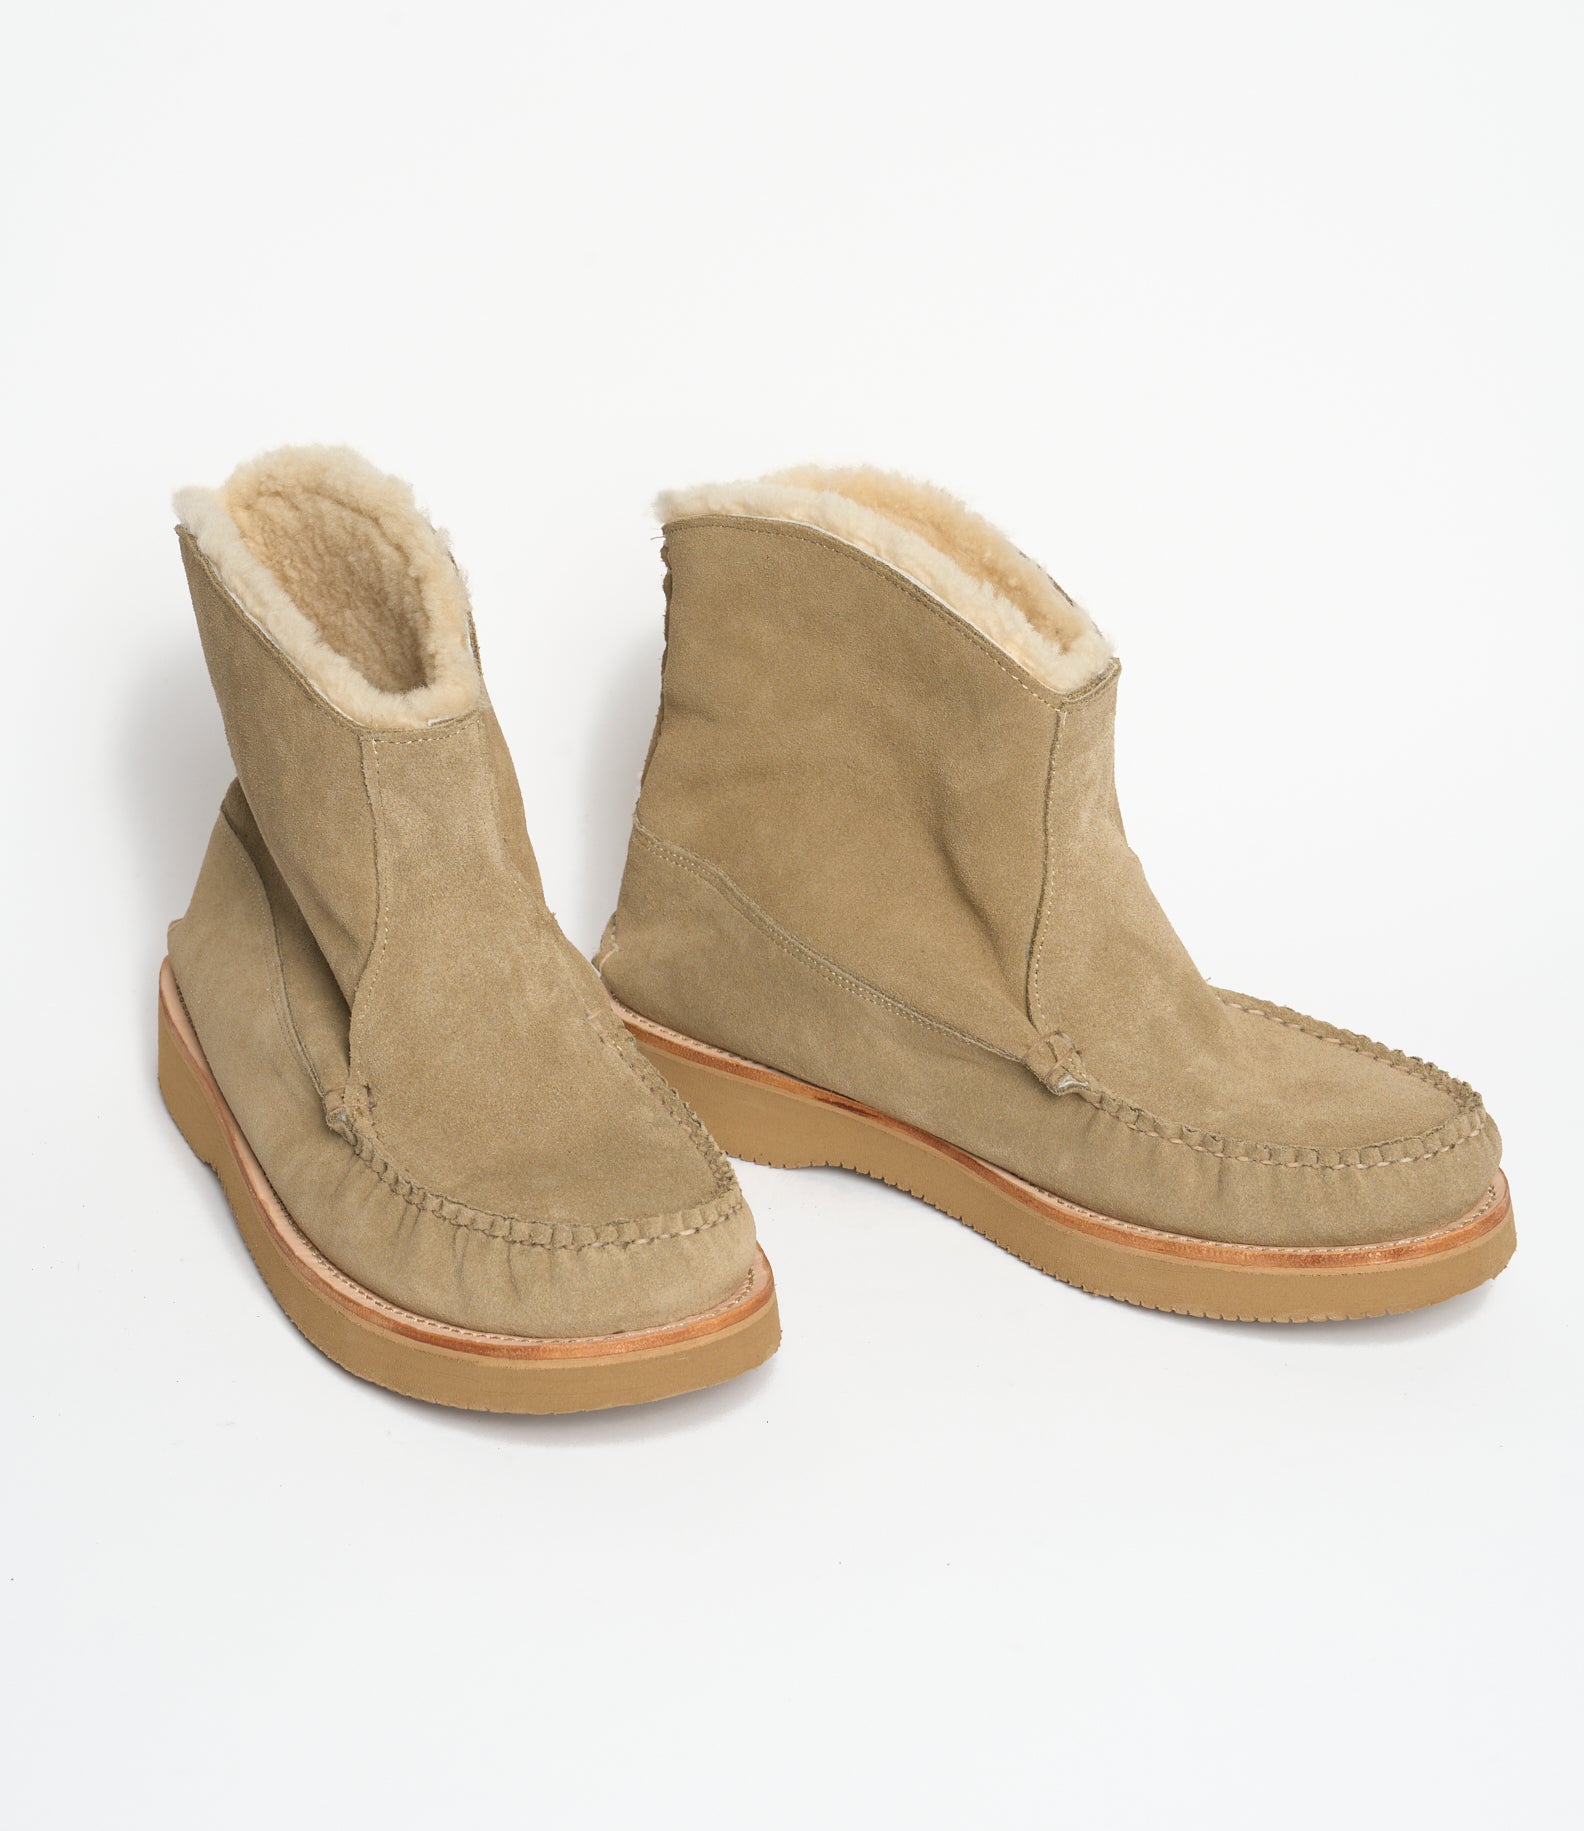 Engineered Garments x Easymoc - Surf Boot - Stone Suede